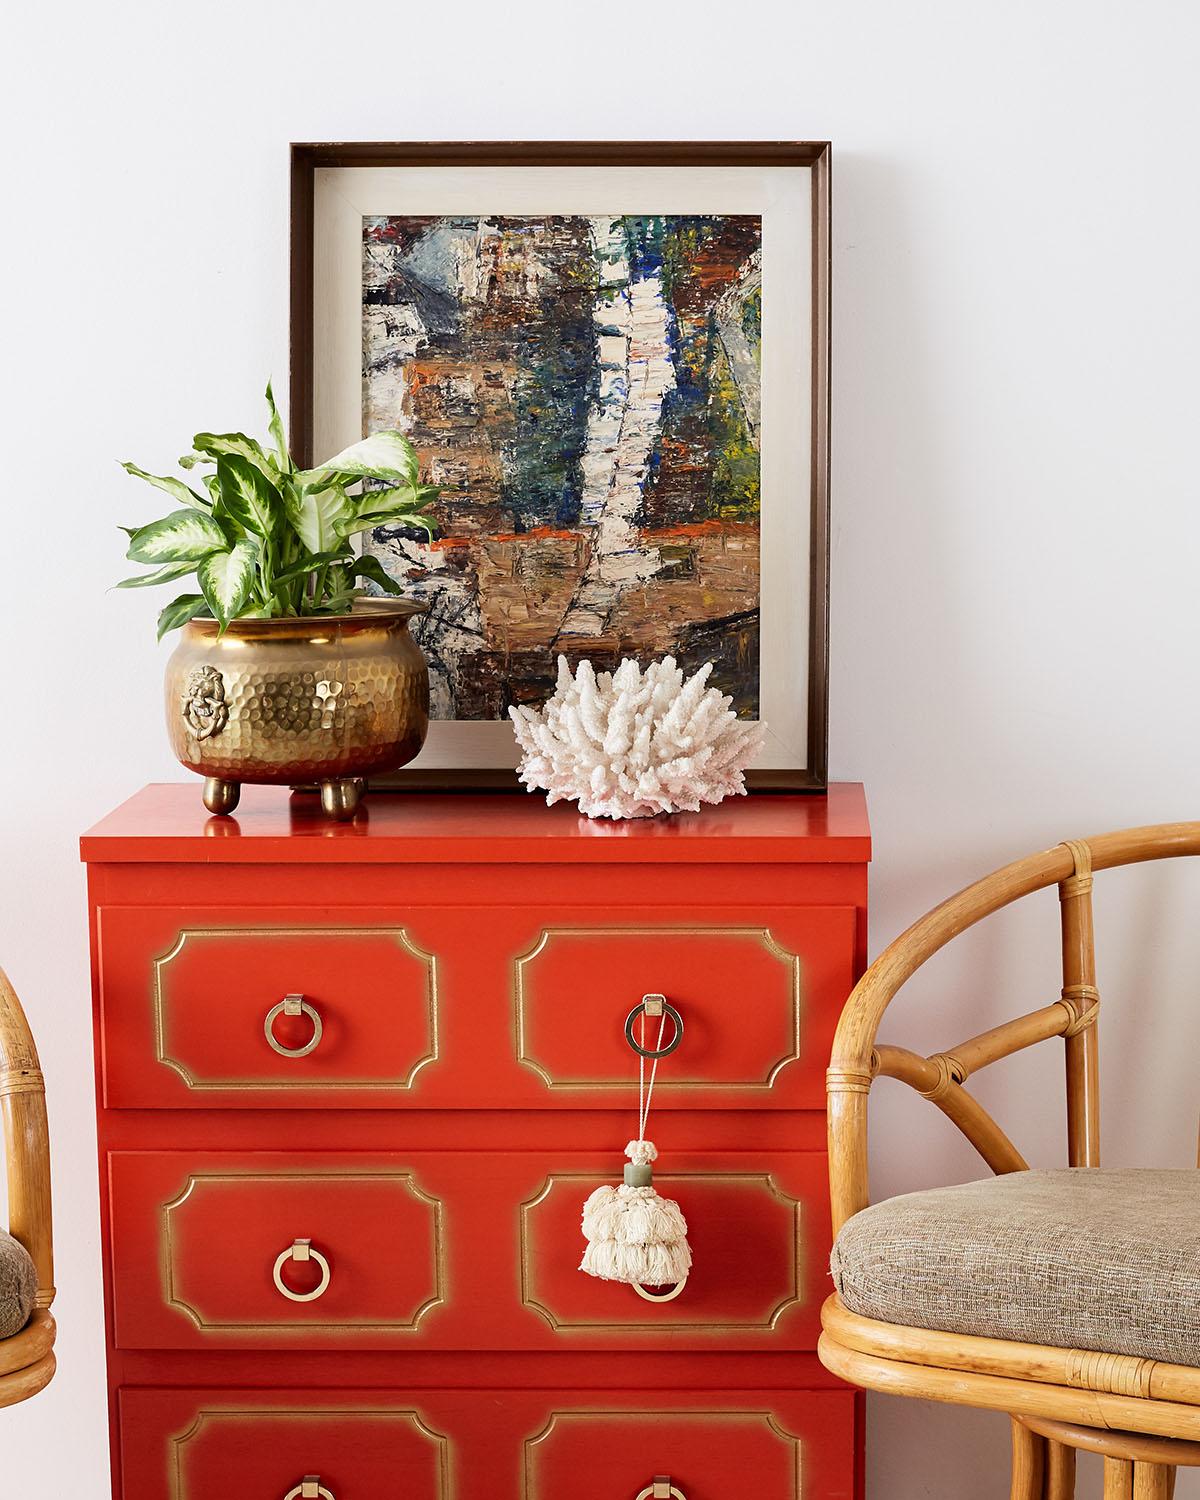 Colorful Dorothy Draper style commode or chest of drawers featuring a chic coral red lacquer with partial gilt accents. Fronted by three large drawers with brass toned pulls. Made in the mid-20th century with excellent joinery.